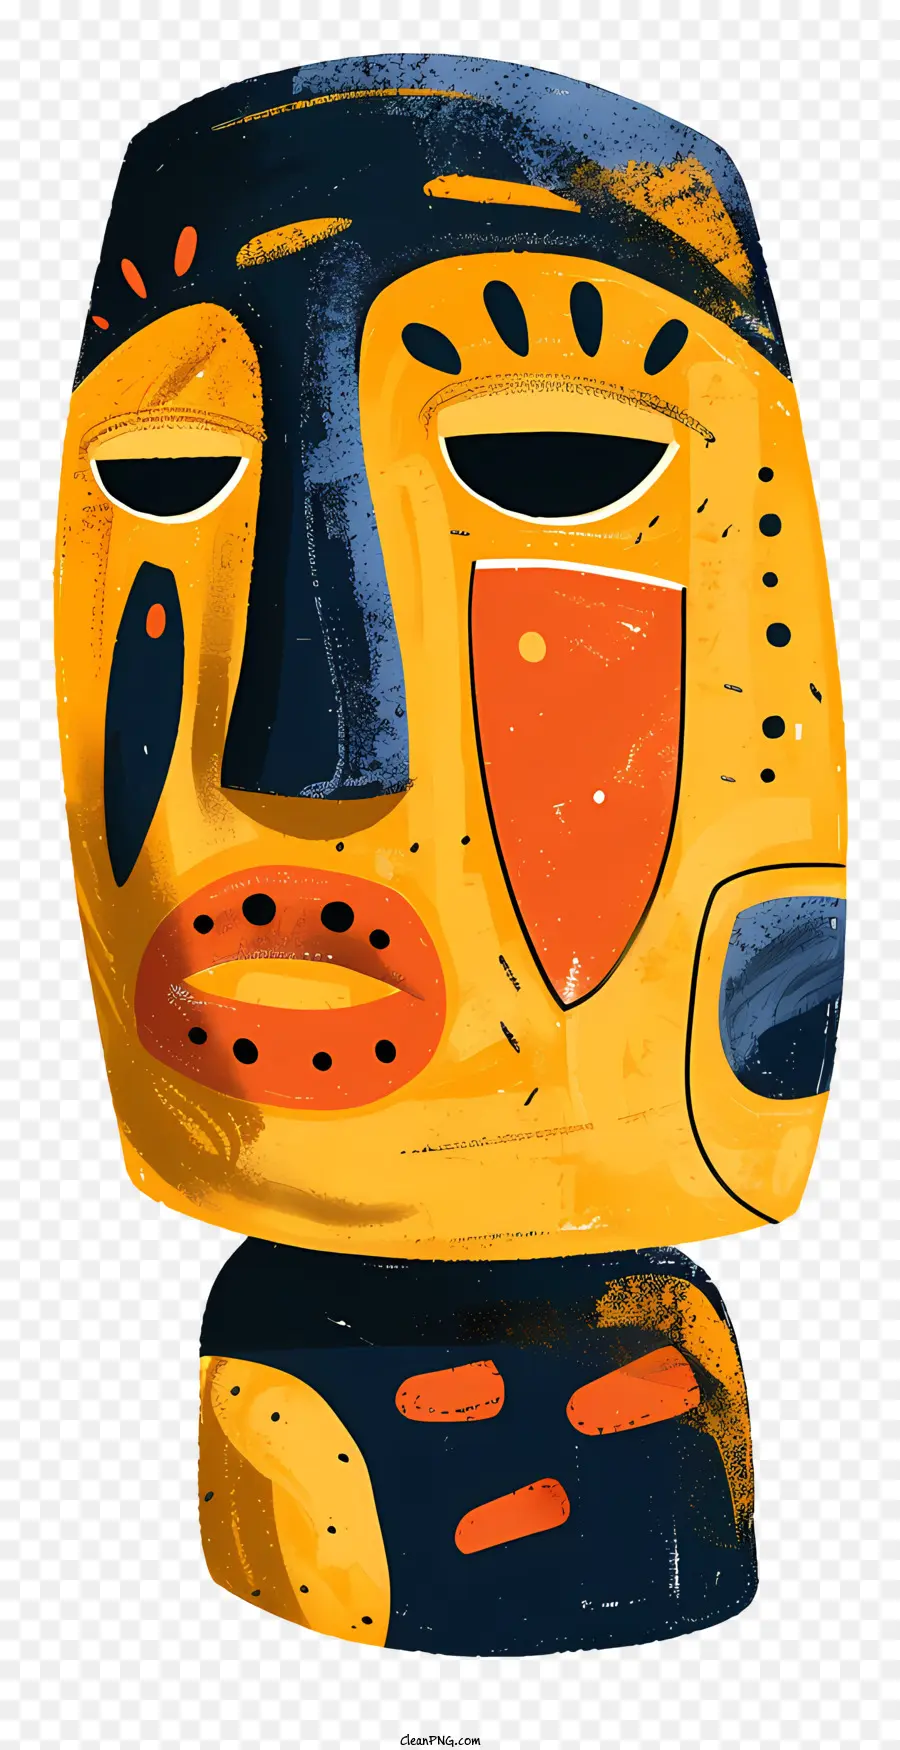 ancient symbol mask illustration smiling face mask colorful mask abstract face art